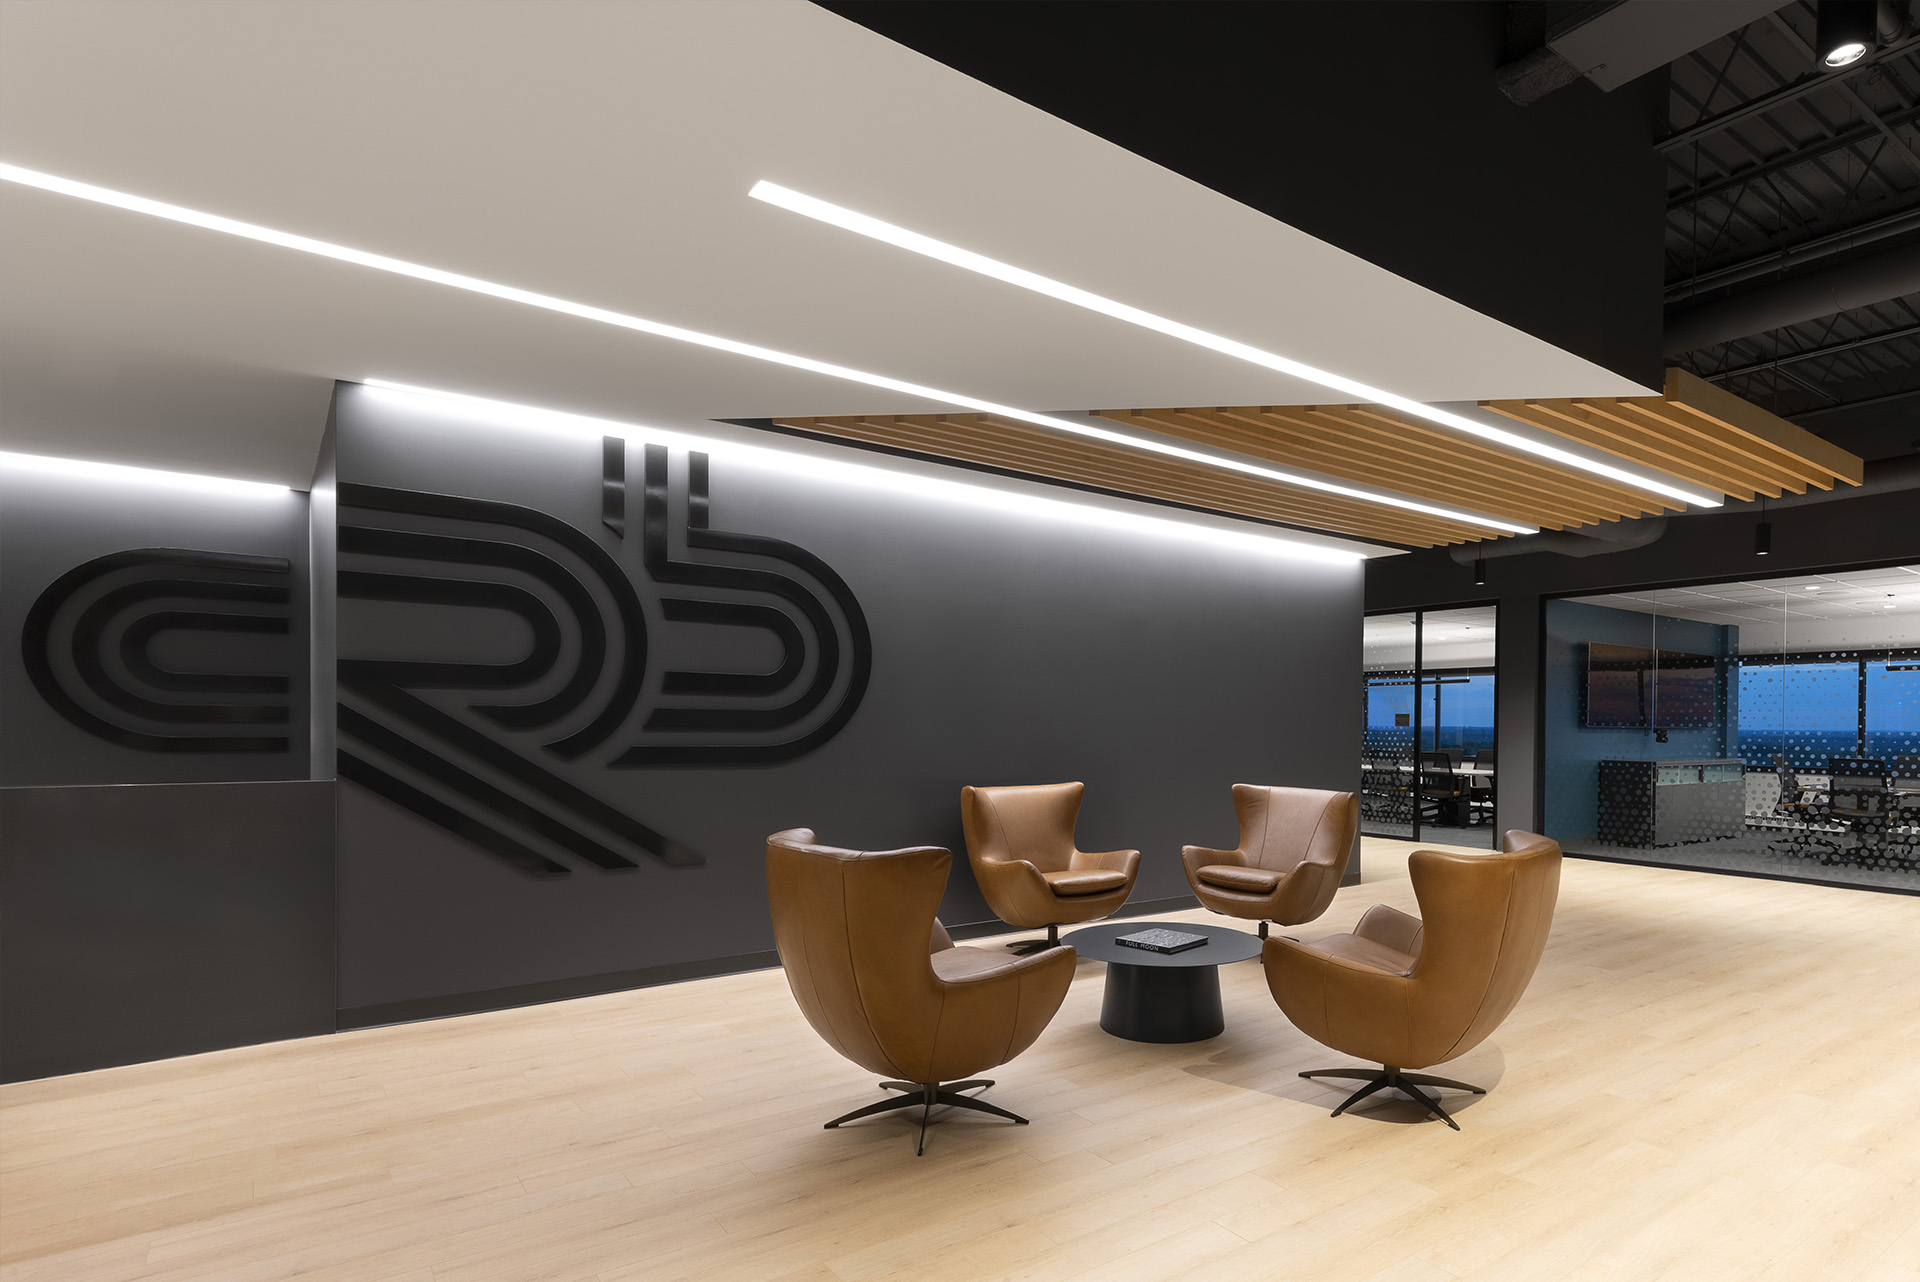 crb engineering architecture interior design workplace